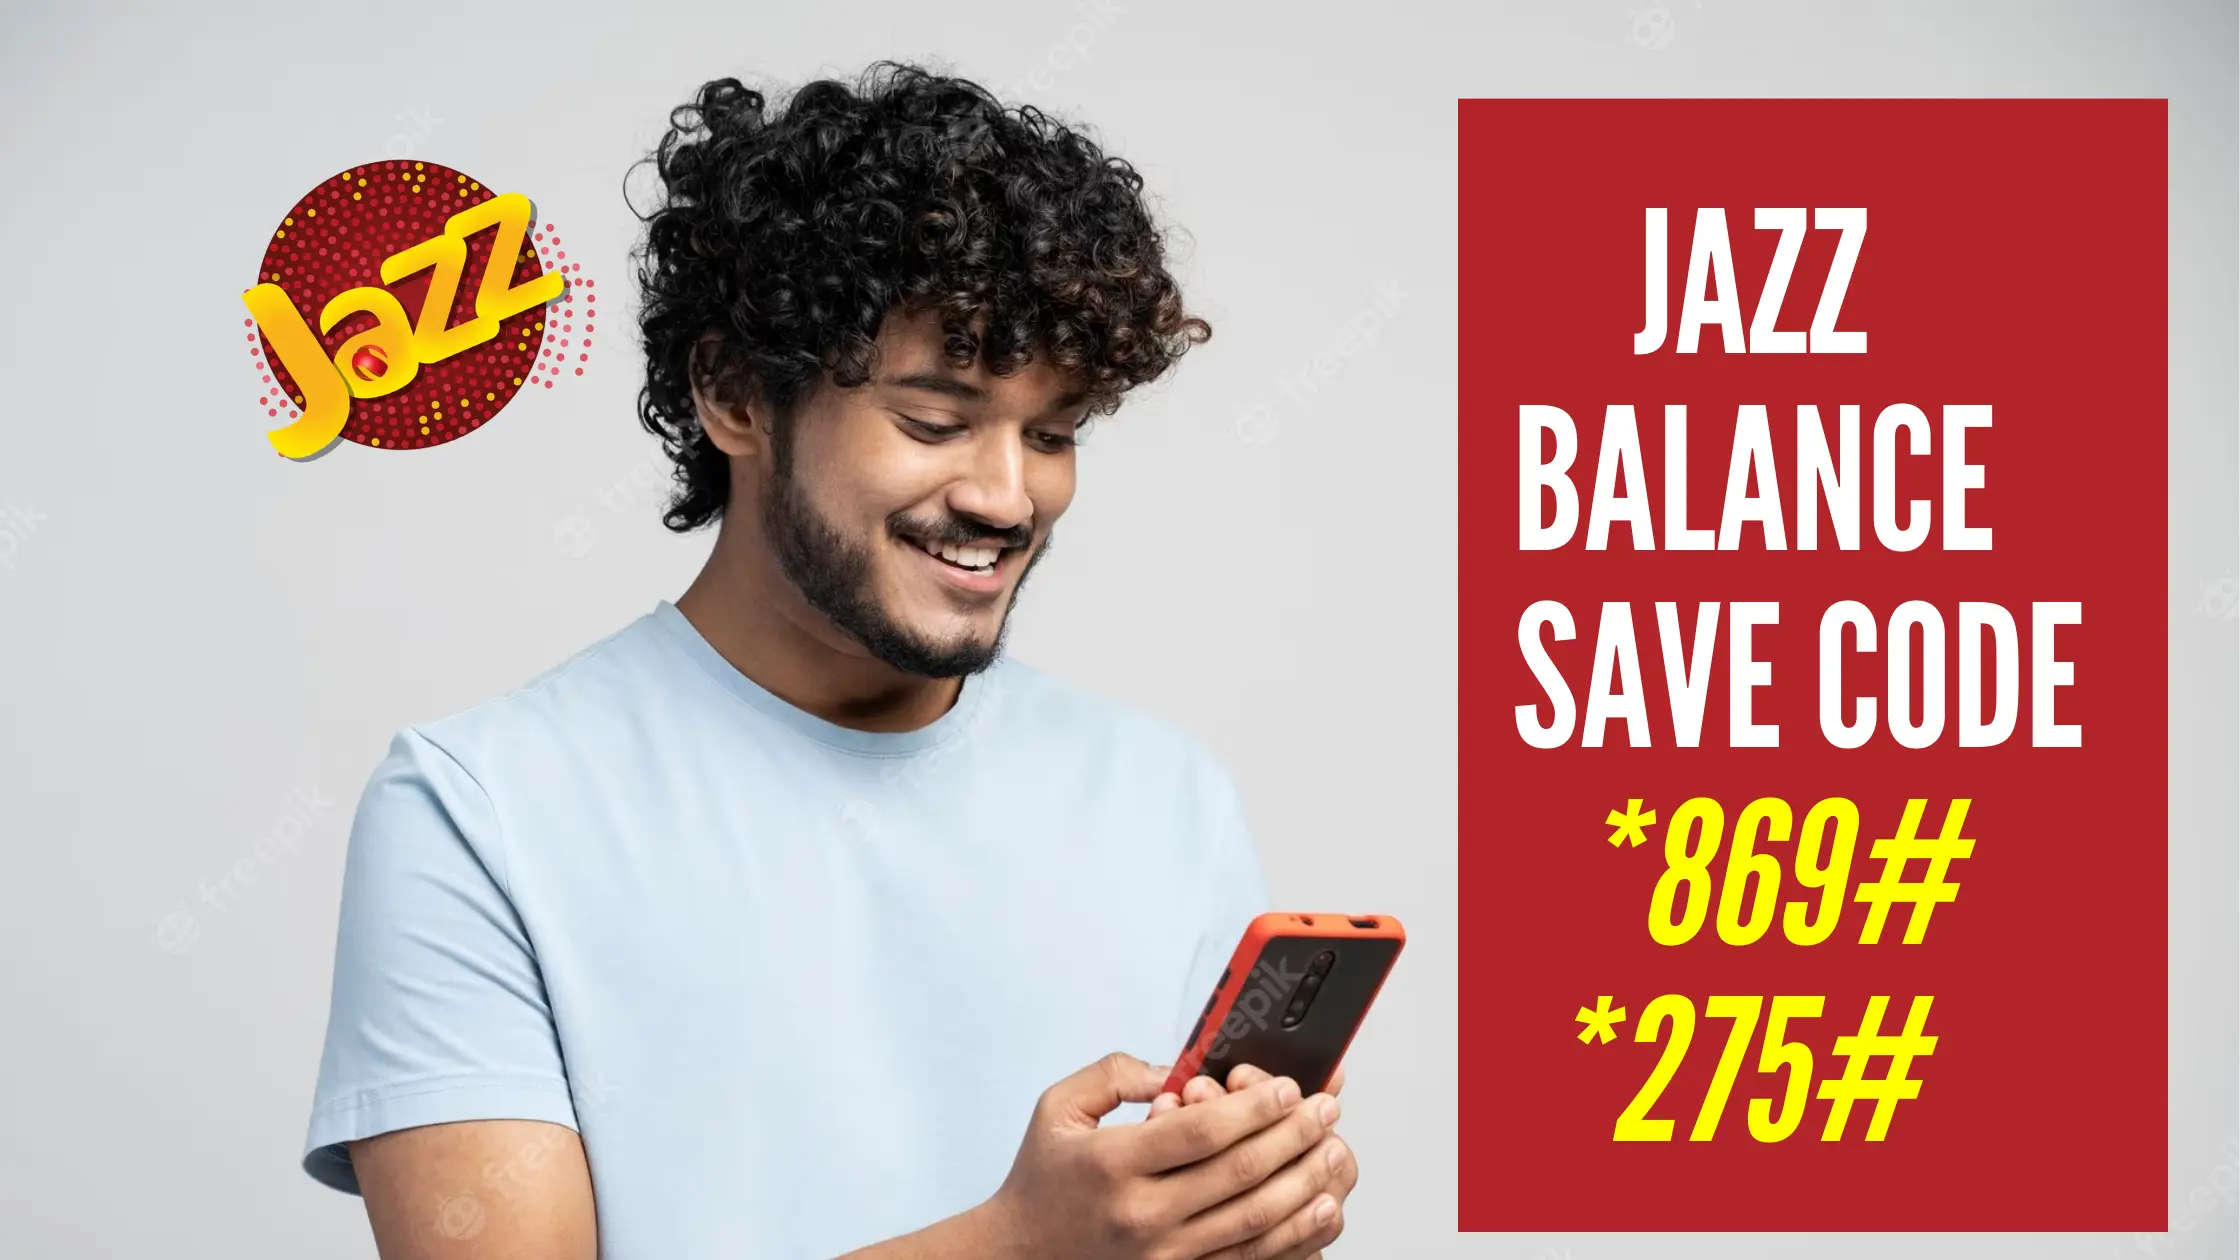 jazz balance save code: subscirption, unsubscribe & much more